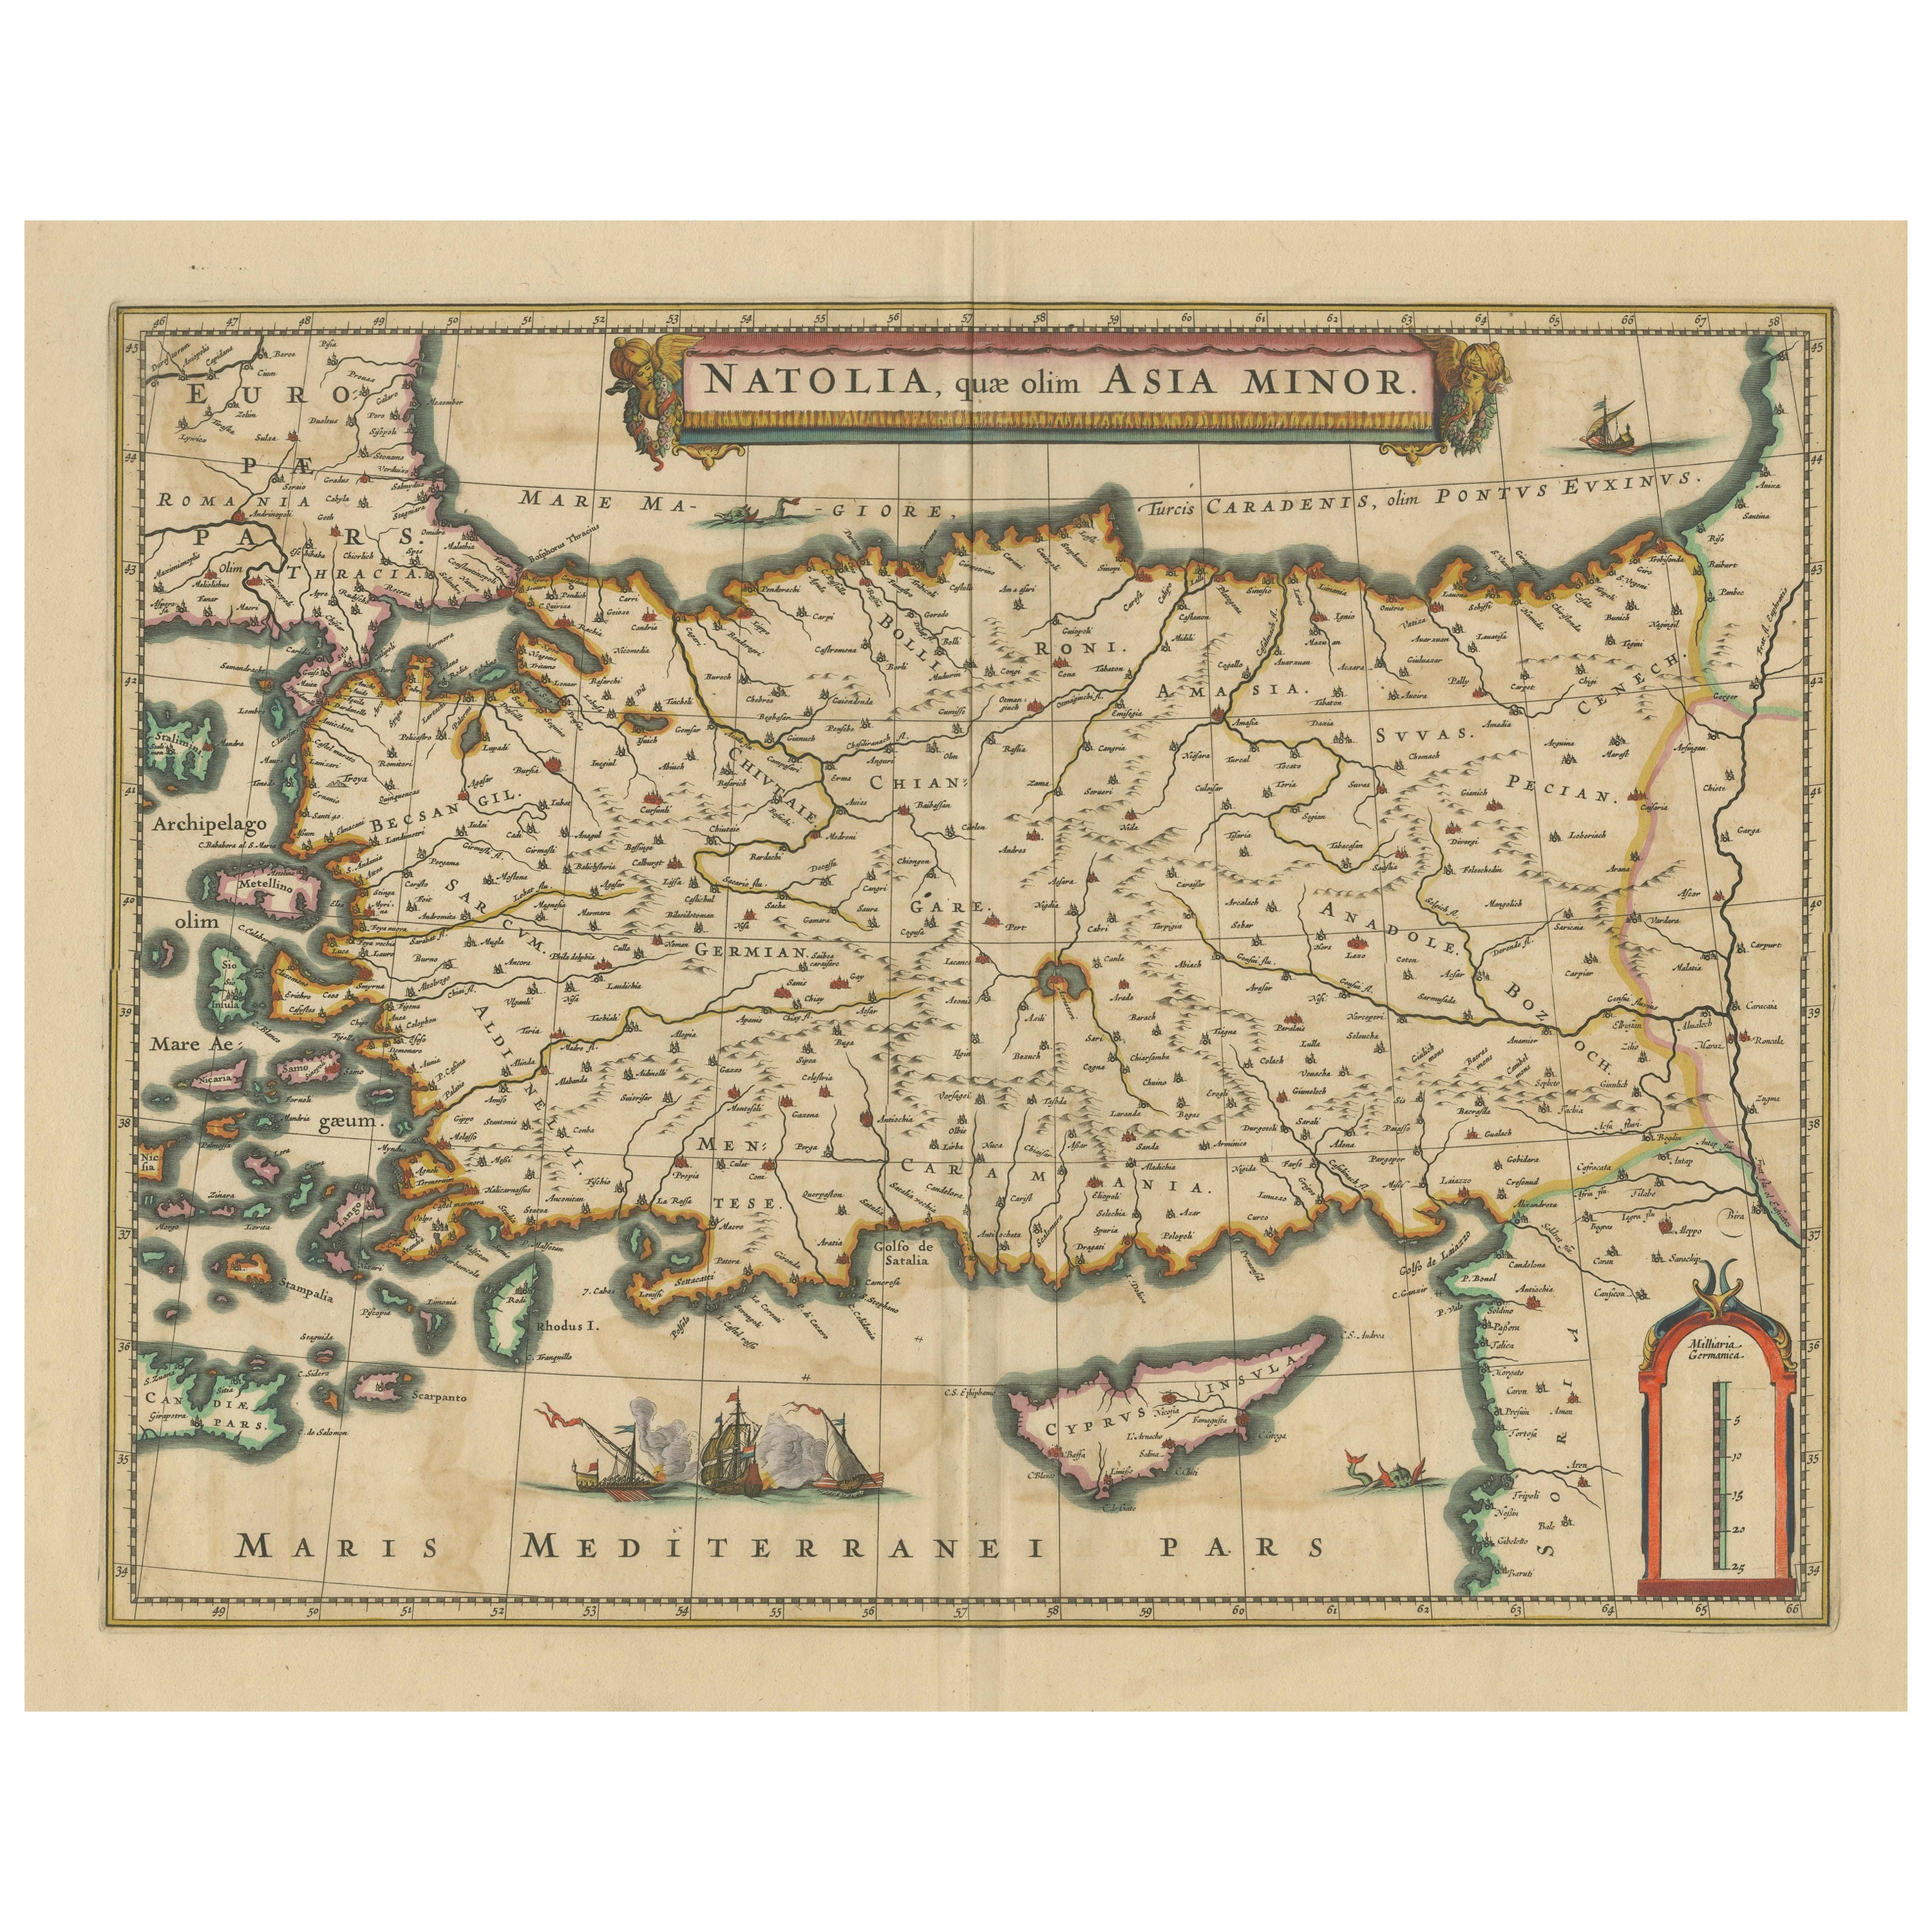 Antique Map of Asia Minor, showing Turkey, Cyprus and the Islands in the Aegean For Sale